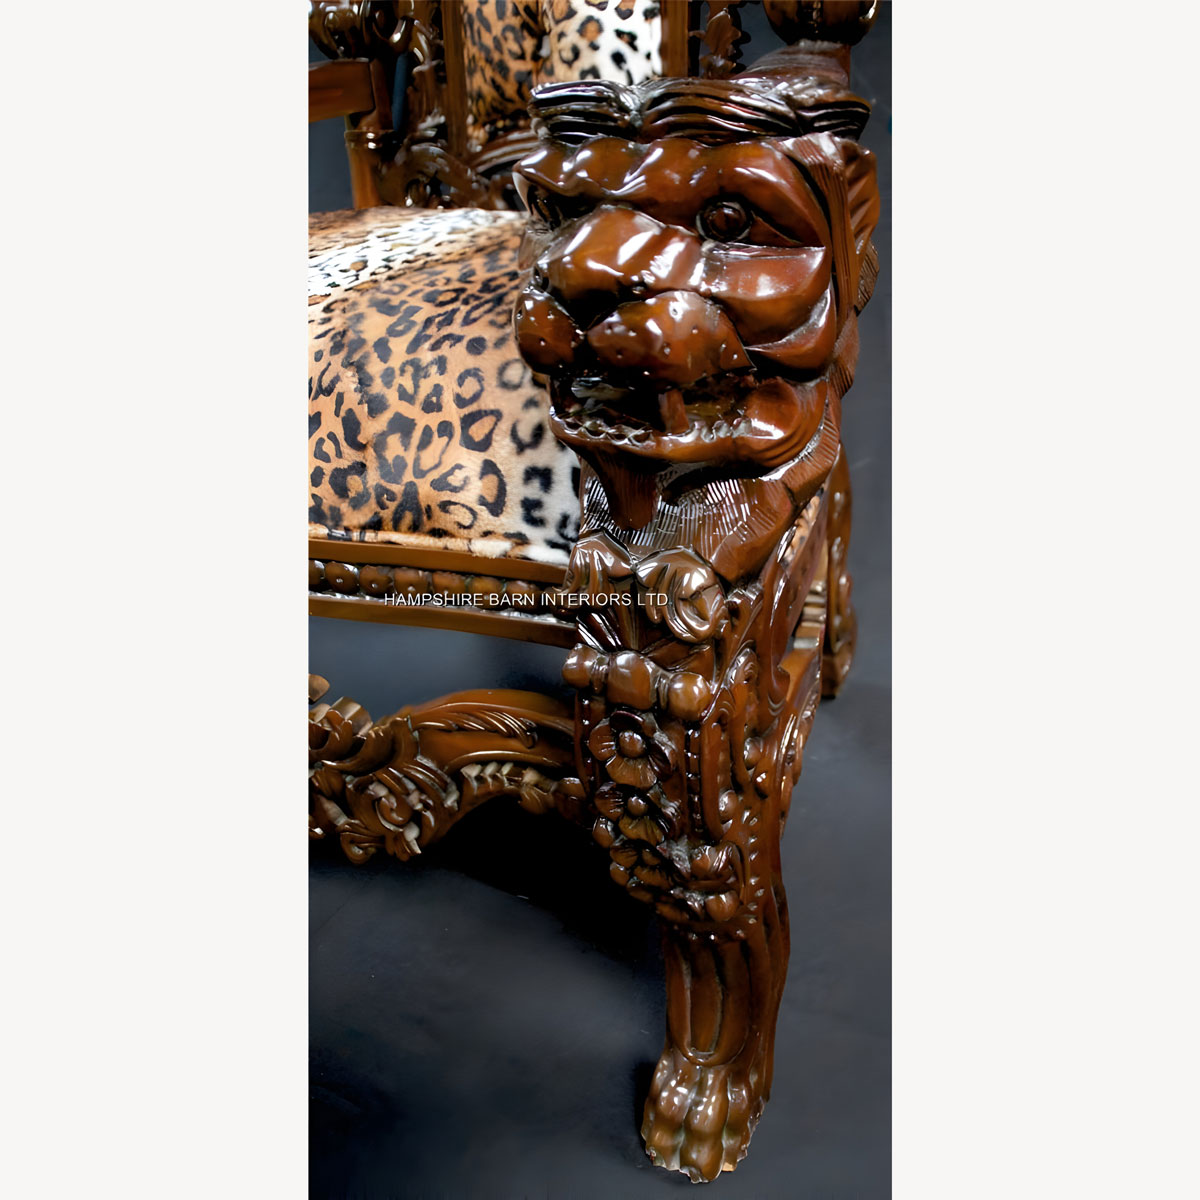 Mahogany Lion King Throne Chair With Leopard Animal Print Textured Fabric 3 - Hampshire Barn Interiors - Mahogany Lion King Throne Chair With Leopard Animal Print Textured Fabric -